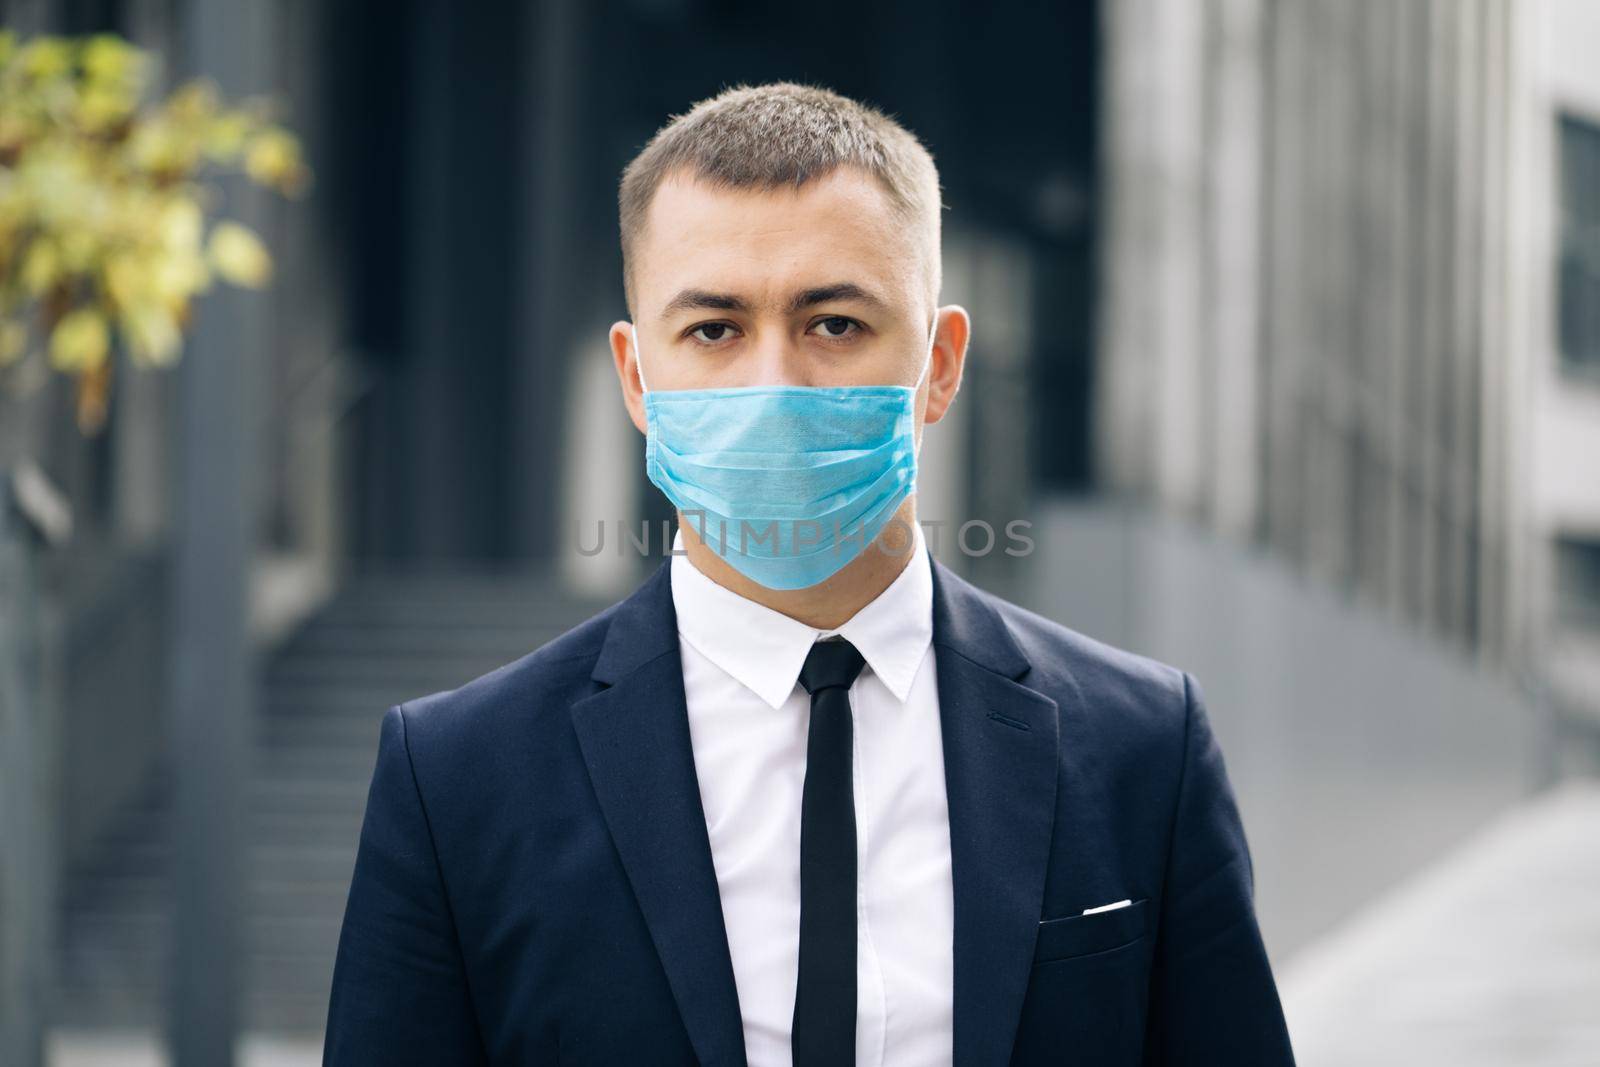 Portrait Business Man in Protective Face Mask Look at Camera COVID-19 Coronavirus Infection. Face mask Covid-19. Epidemic Coronavirus Mers. Pandemic Flu Corona Virus. Human Masked 2019-ncov by uflypro